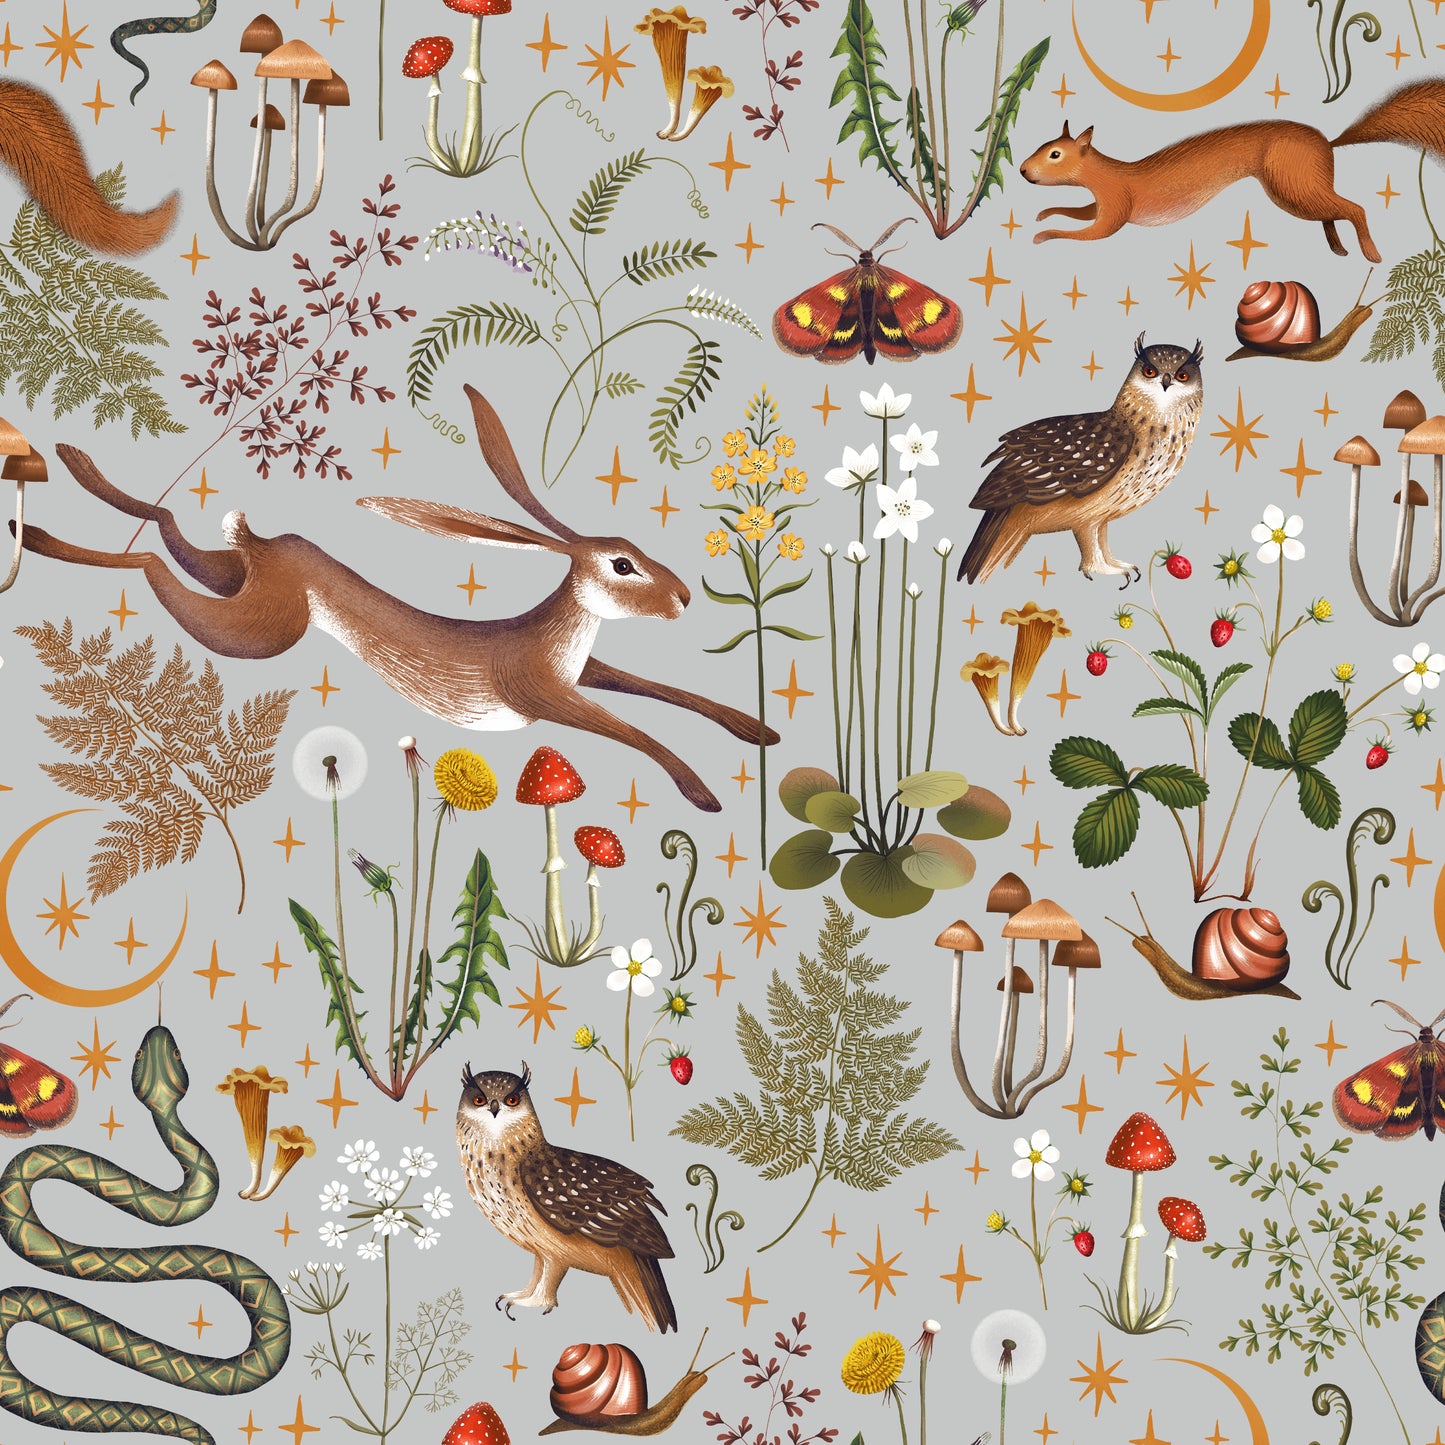 Woodland Forest Removable Peel And Stick Wallpaper